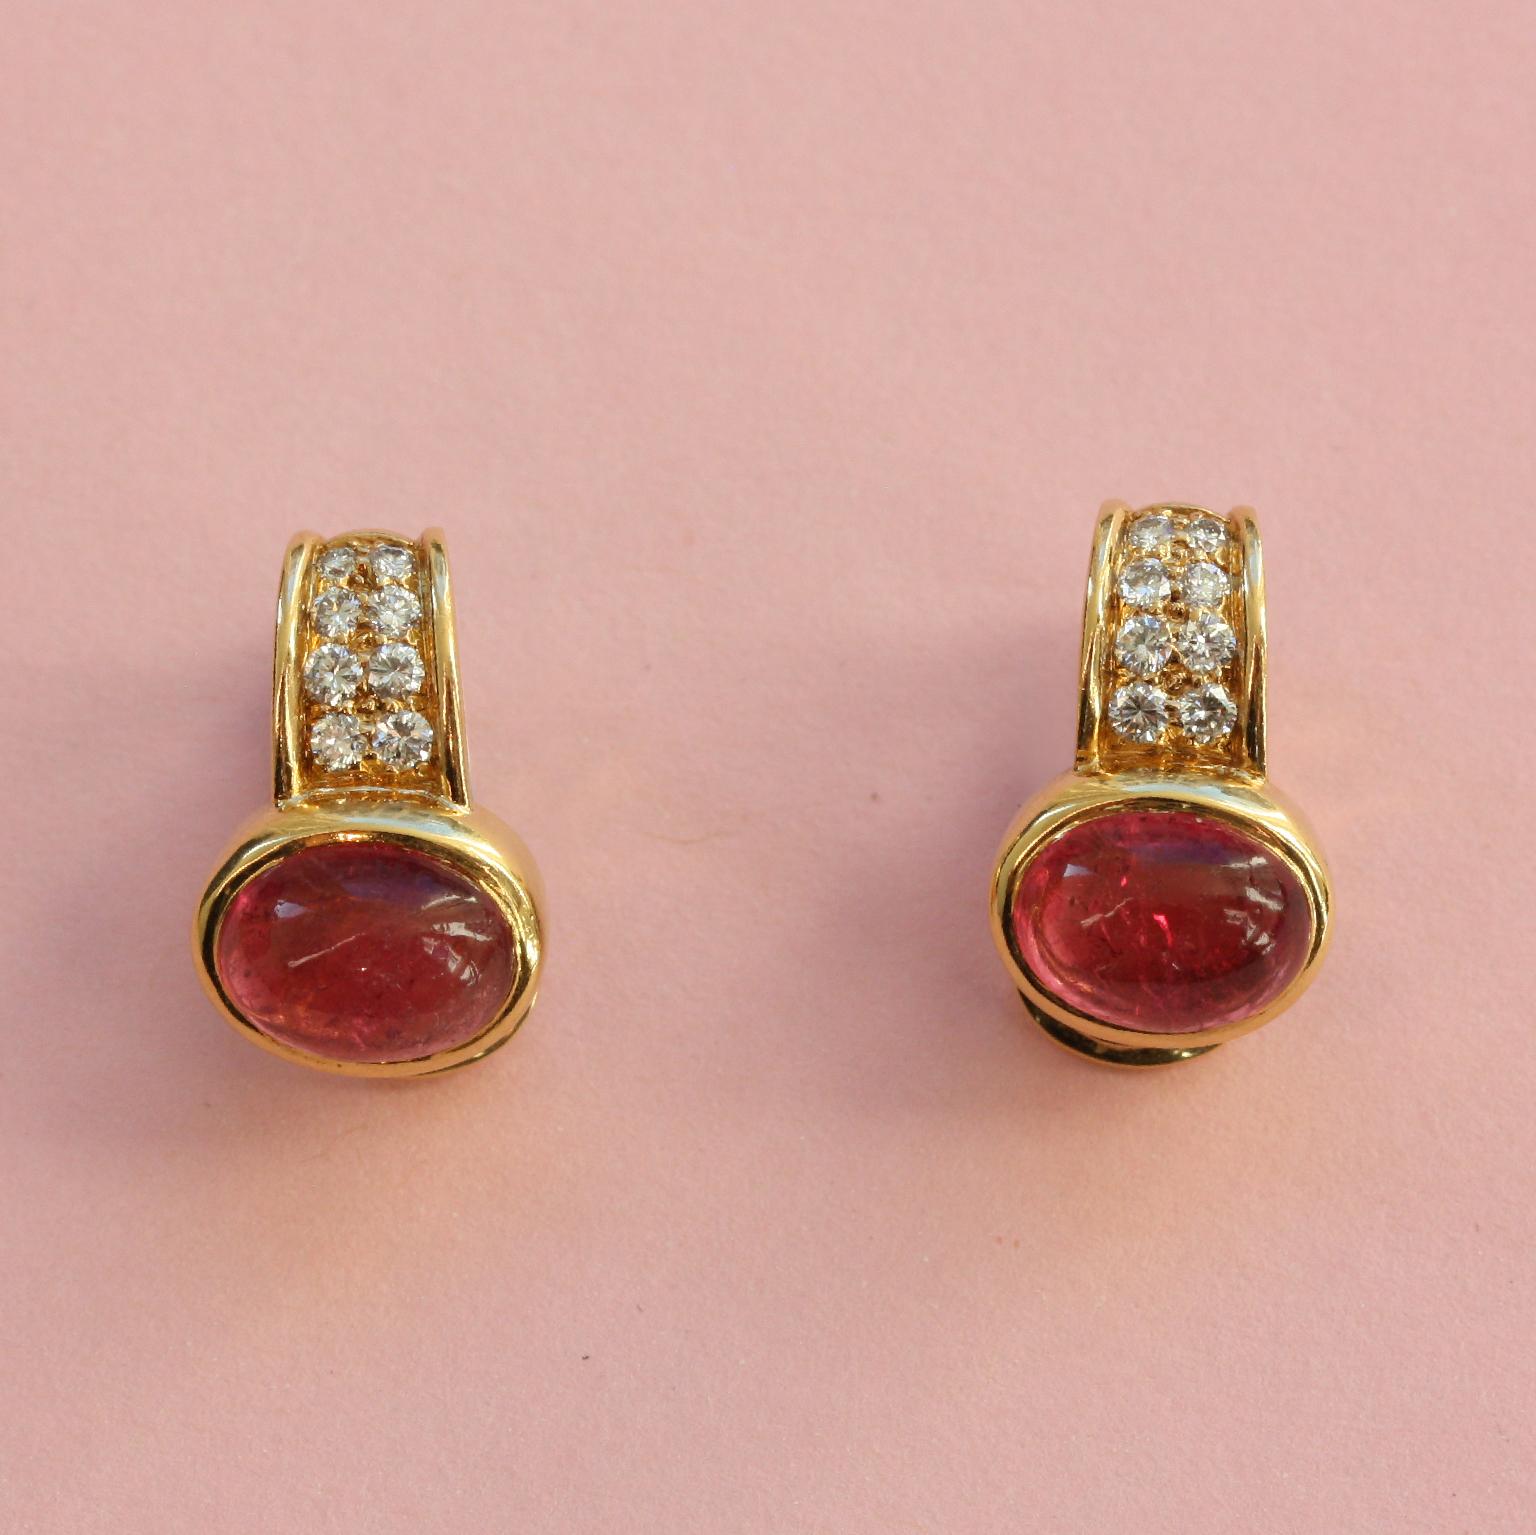 A pair of 20 carat gold ear clips each set with an oval cabochon cut pink tourmaline set sideways under a row of eight brilliant cut diamonds (app. 0.12 carats), signed: Bulgari, Italy, circa 1980s.

weight: 9.39 gram
dimensions: 16 x 10